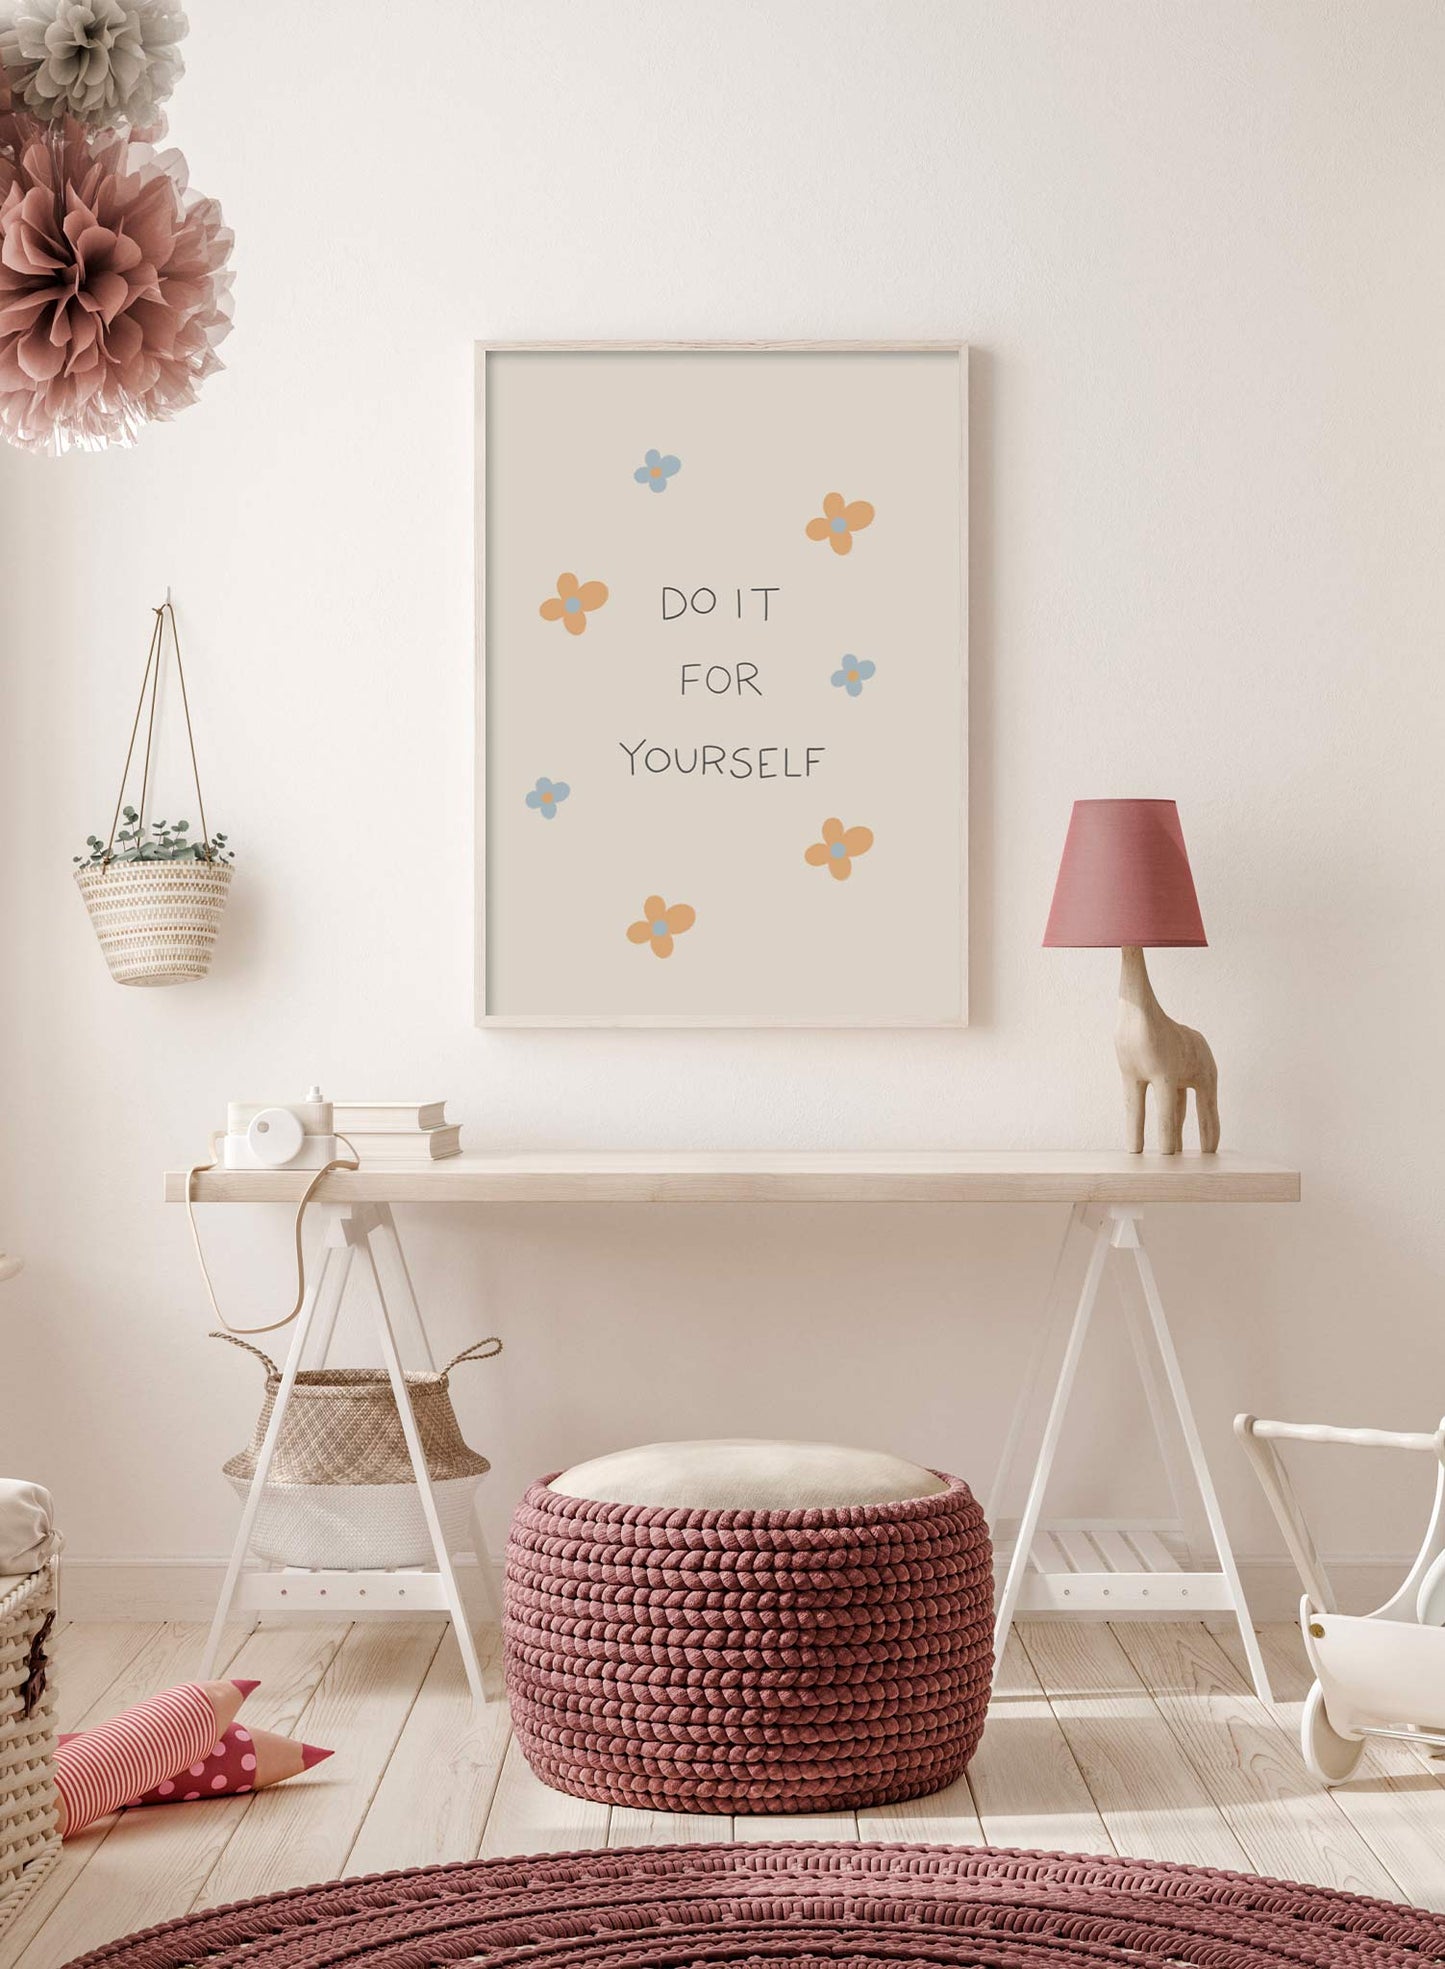 Do It For Yourself is a minimalist typography by Opposite Wall of the message "Do It For Yourself". 